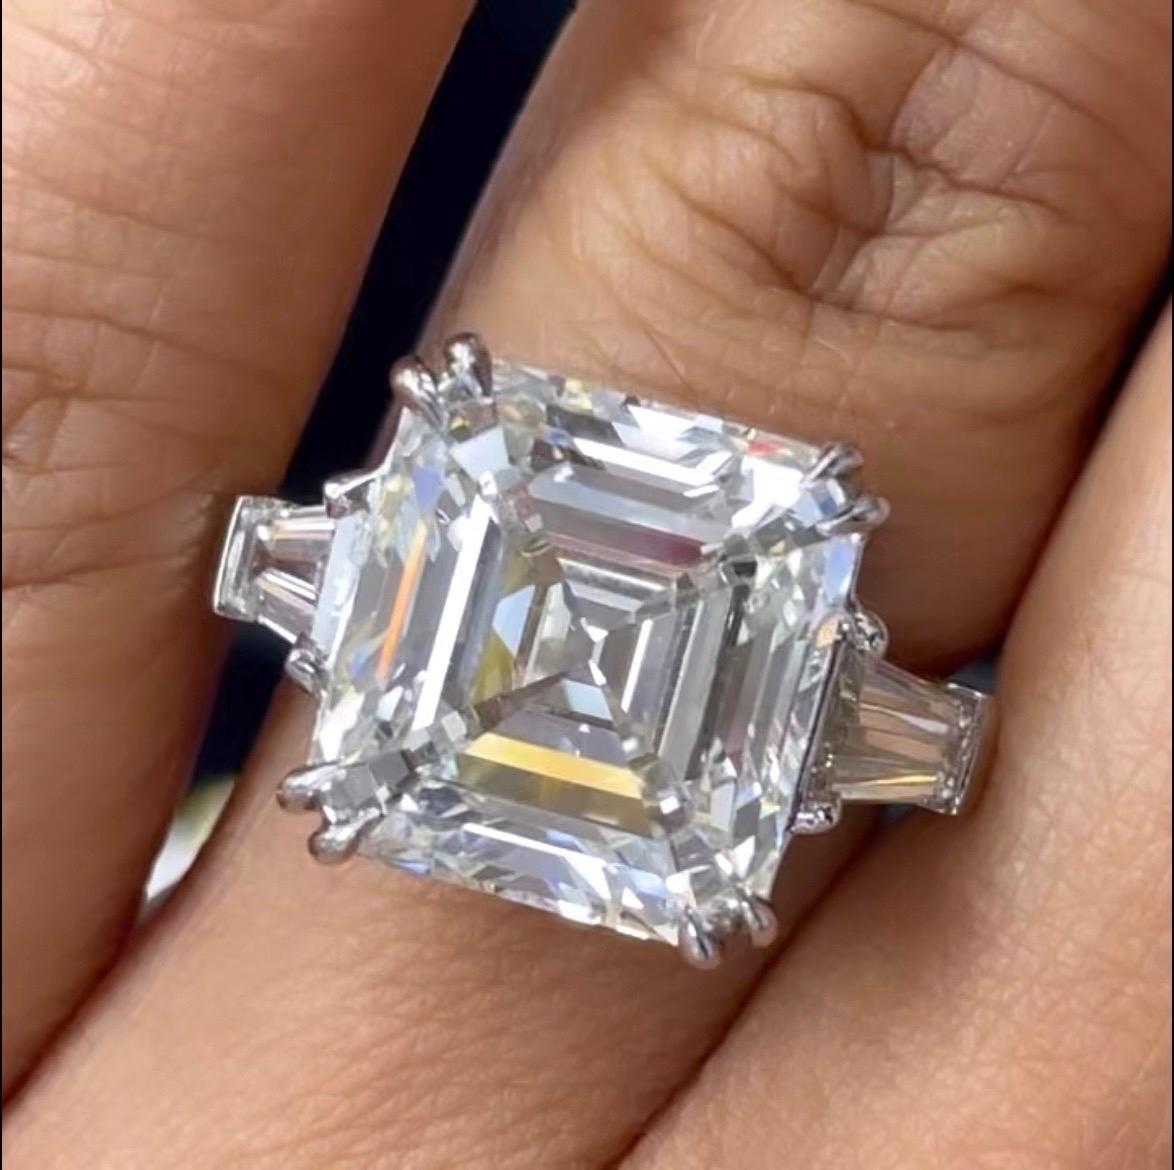 A bold and daring ring designed and created for a power person, this 10 carat Emerald Ring with baguette accents is a statement and emerald cut lover's dream. The depth of 63.6% makes it appear larger for its size and whiter for its color grade